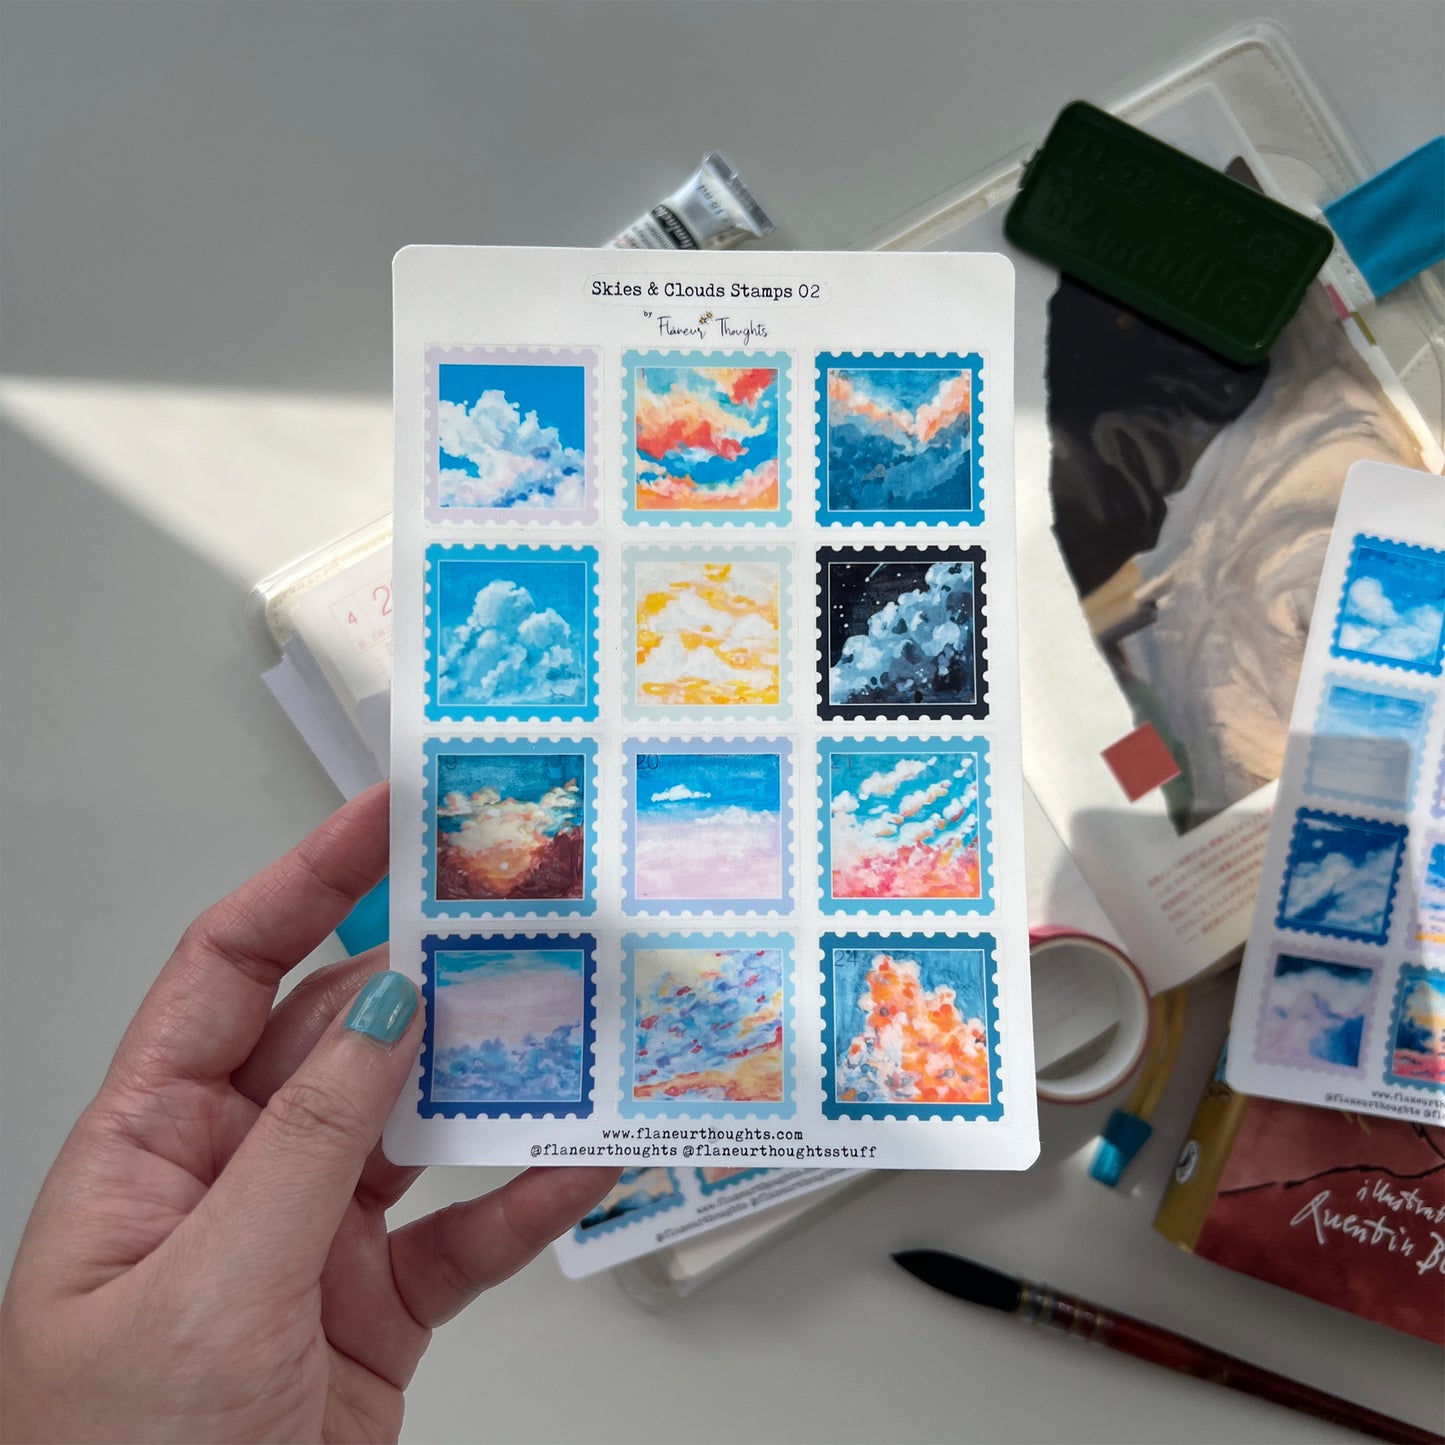 Skies and Clouds Stamps 01 to 03